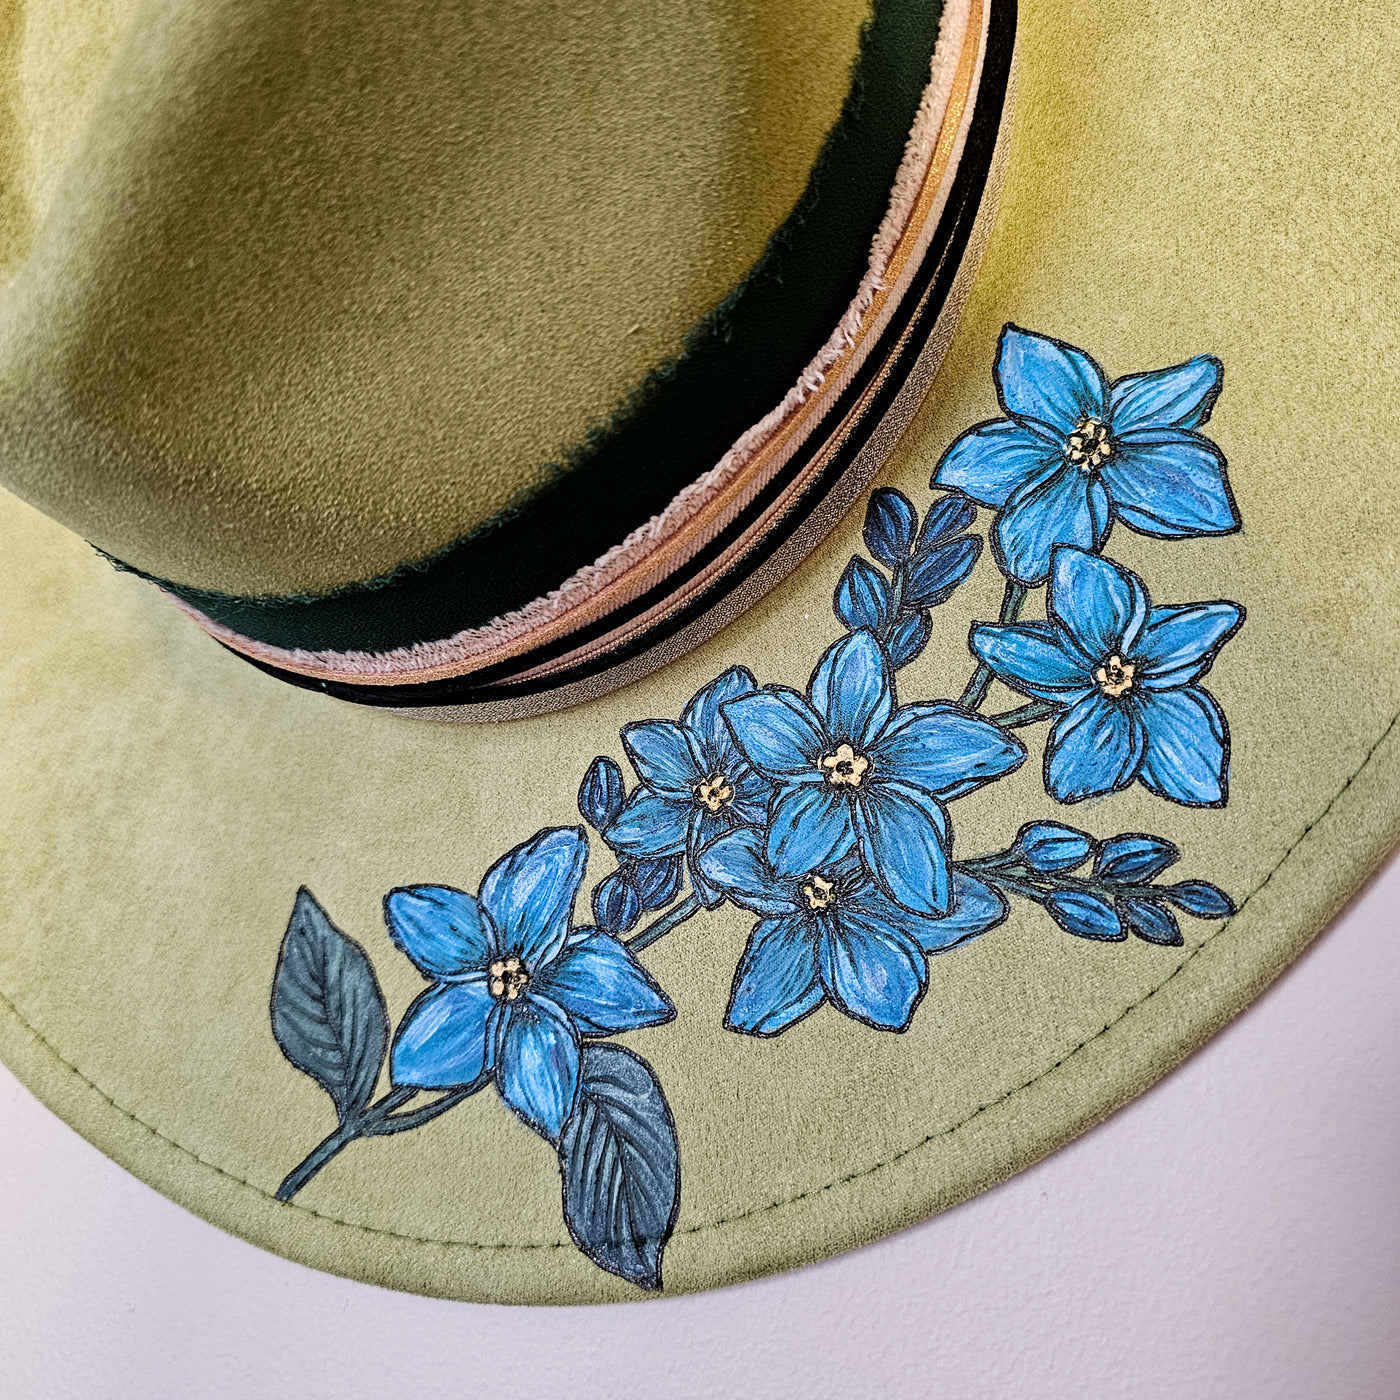 Forget-Me-Not || Avocado Green Suede Burned Wide Brim Hat